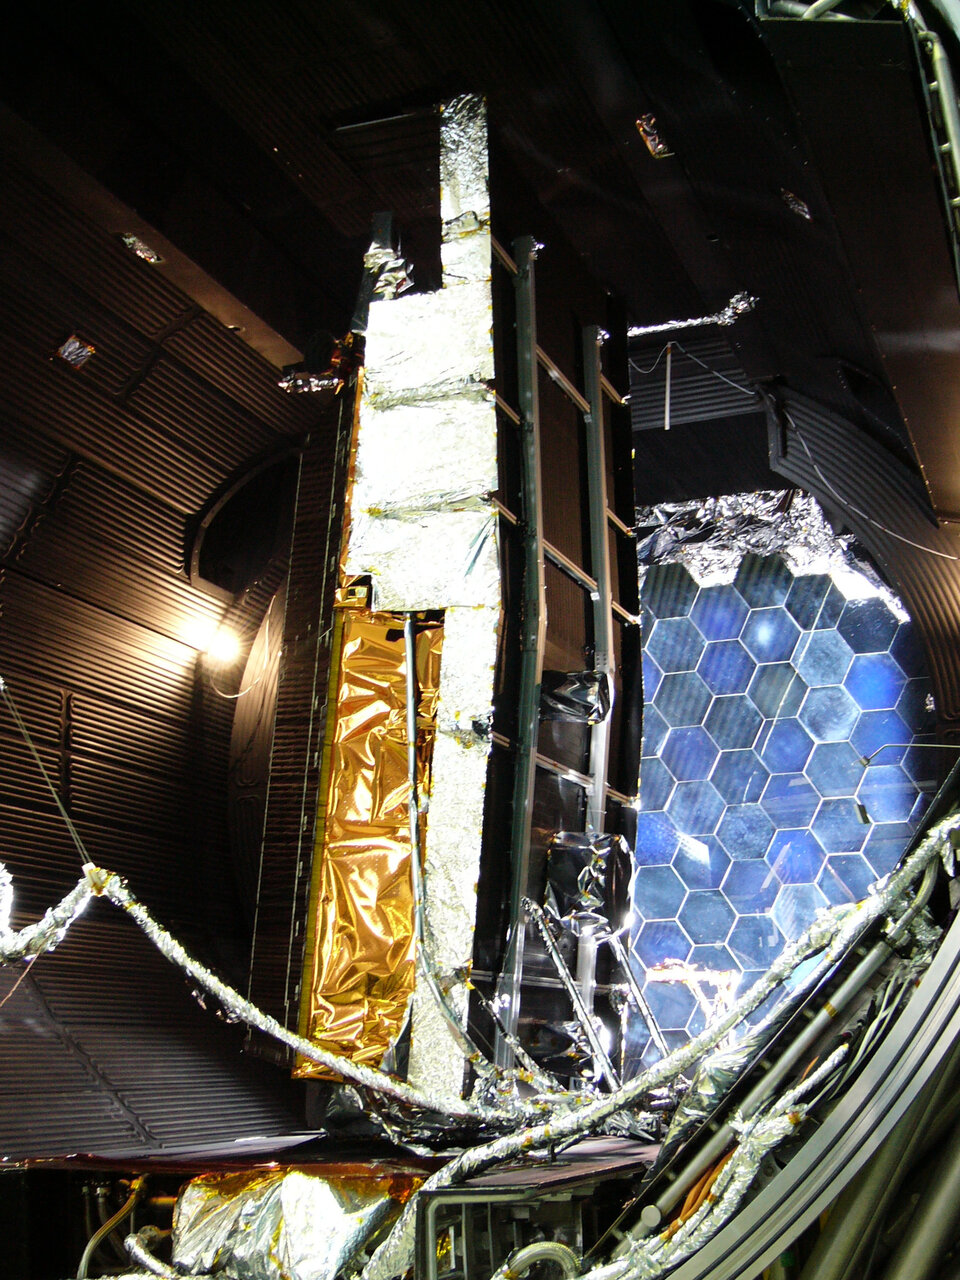 CryoSat in the thermal chamber